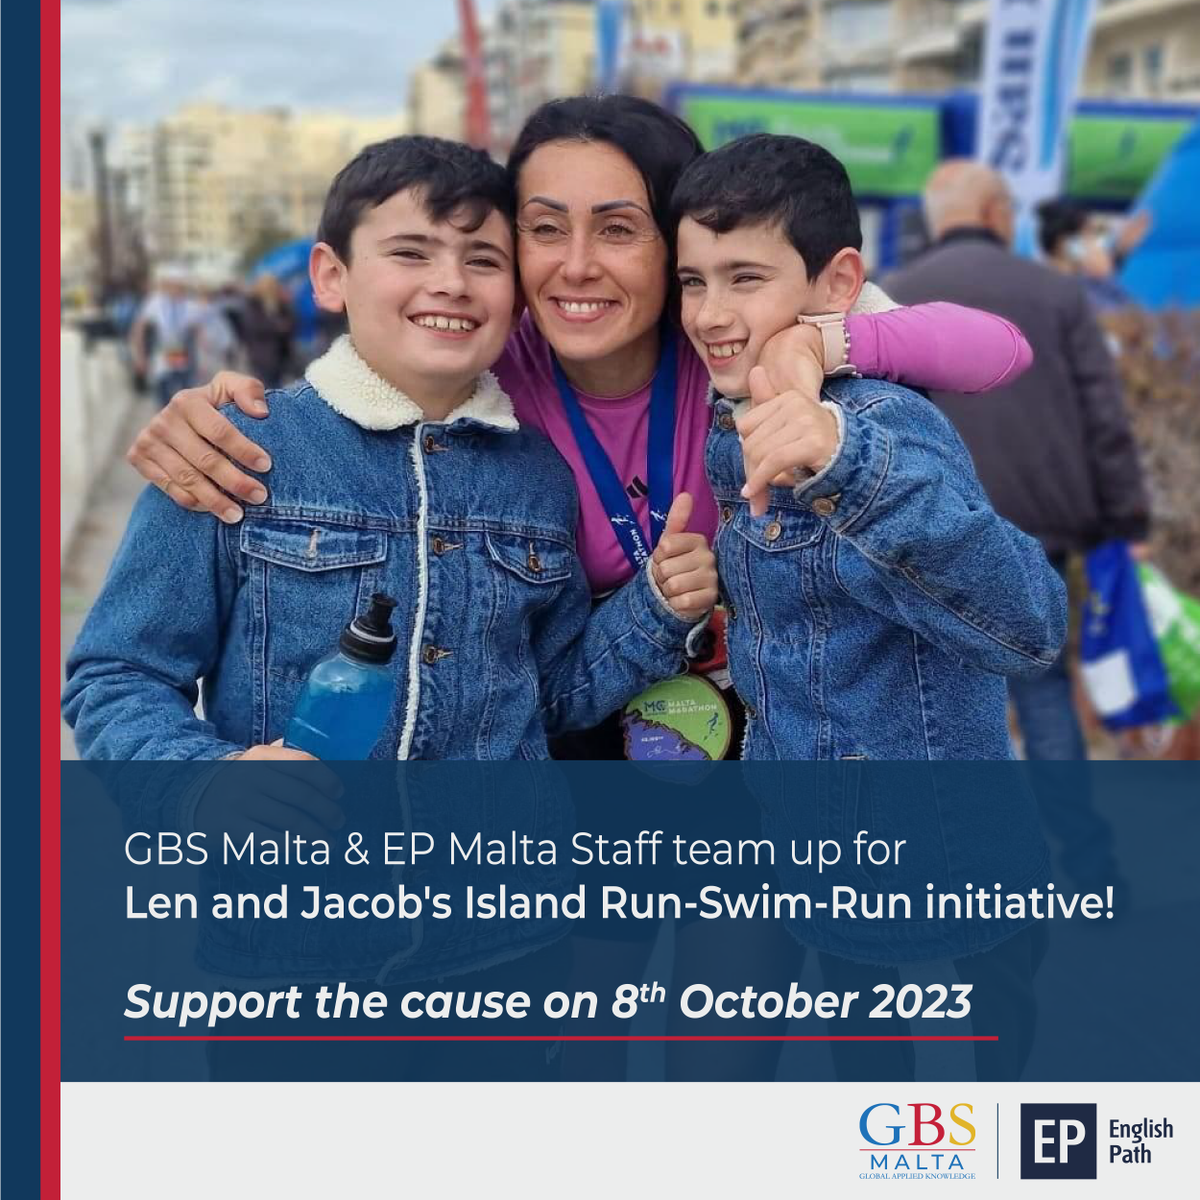 This October 8th, EP Malta & GBS Malta staff will demonstrate their commitment in a one-of-a-kind run-swim-run event, traversing islands to raise funds and awareness for the Len and Jacob cause. ⁣

#EnglishPathMalta #GBSMalta #Island2Island #MakingADifference #LenandJacobCause